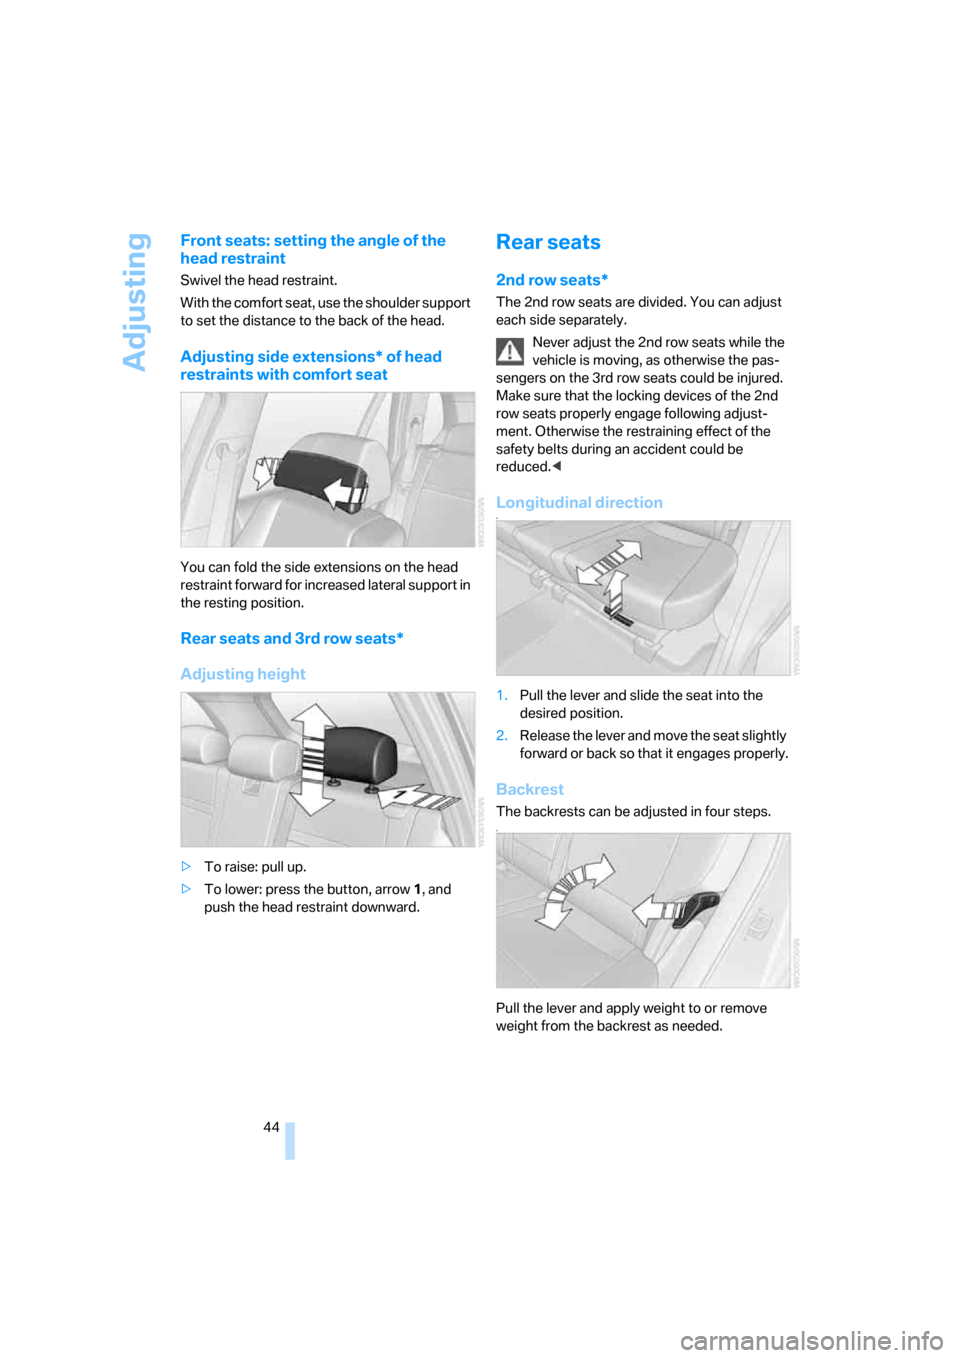 BMW X5 4.8I 2007 E70 Service Manual Adjusting
44
Front seats: setting the angle of the 
head restraint
Swivel the head restraint.
With the comfort seat, use the shoulder support 
to set the distance to the back of the head.
Adjusting si